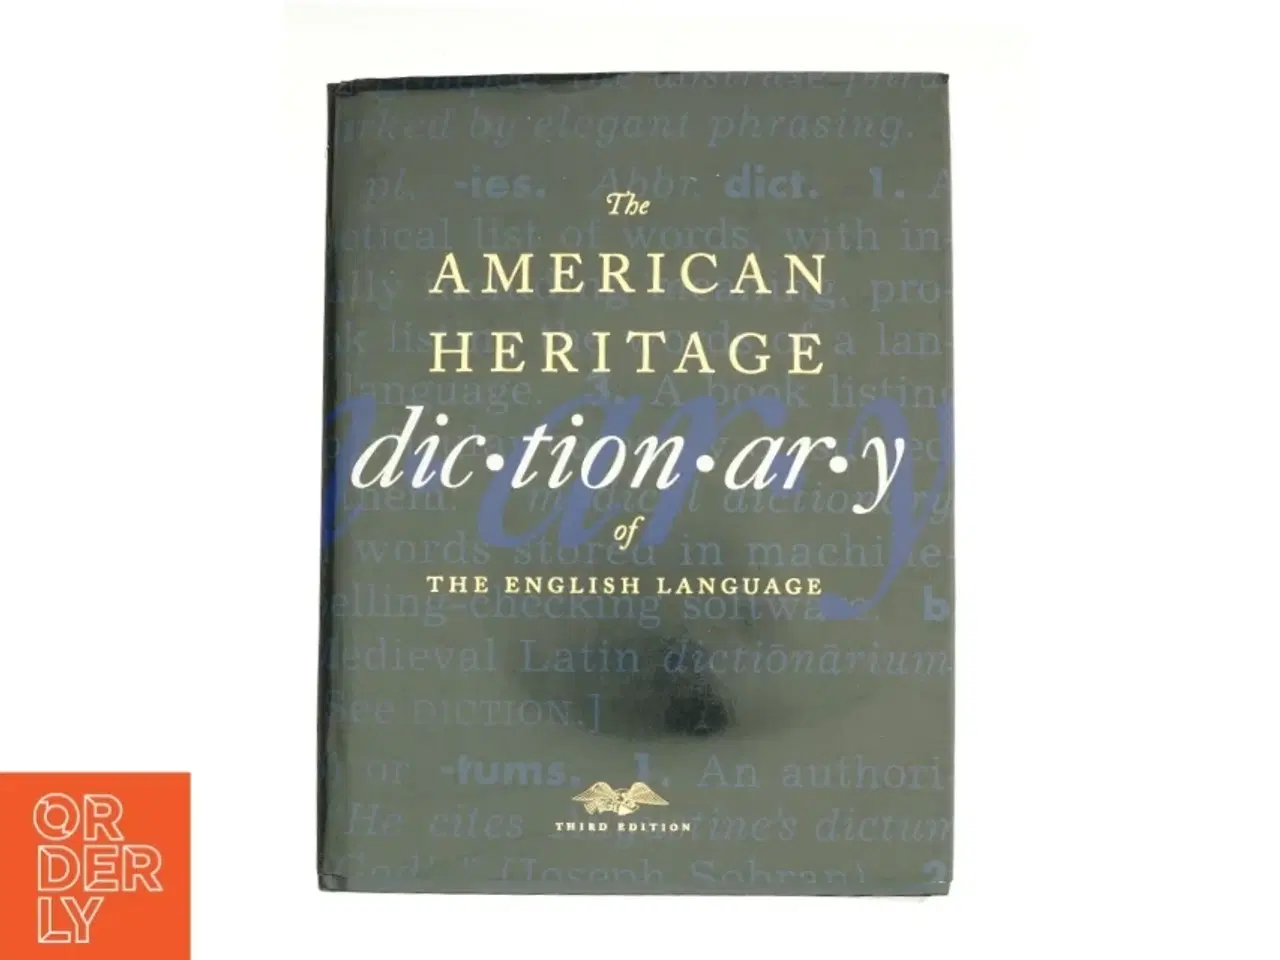 Billede 1 - The American Heritage Dictionary of the English Language af American Heritage Publishing Staff (Bog)